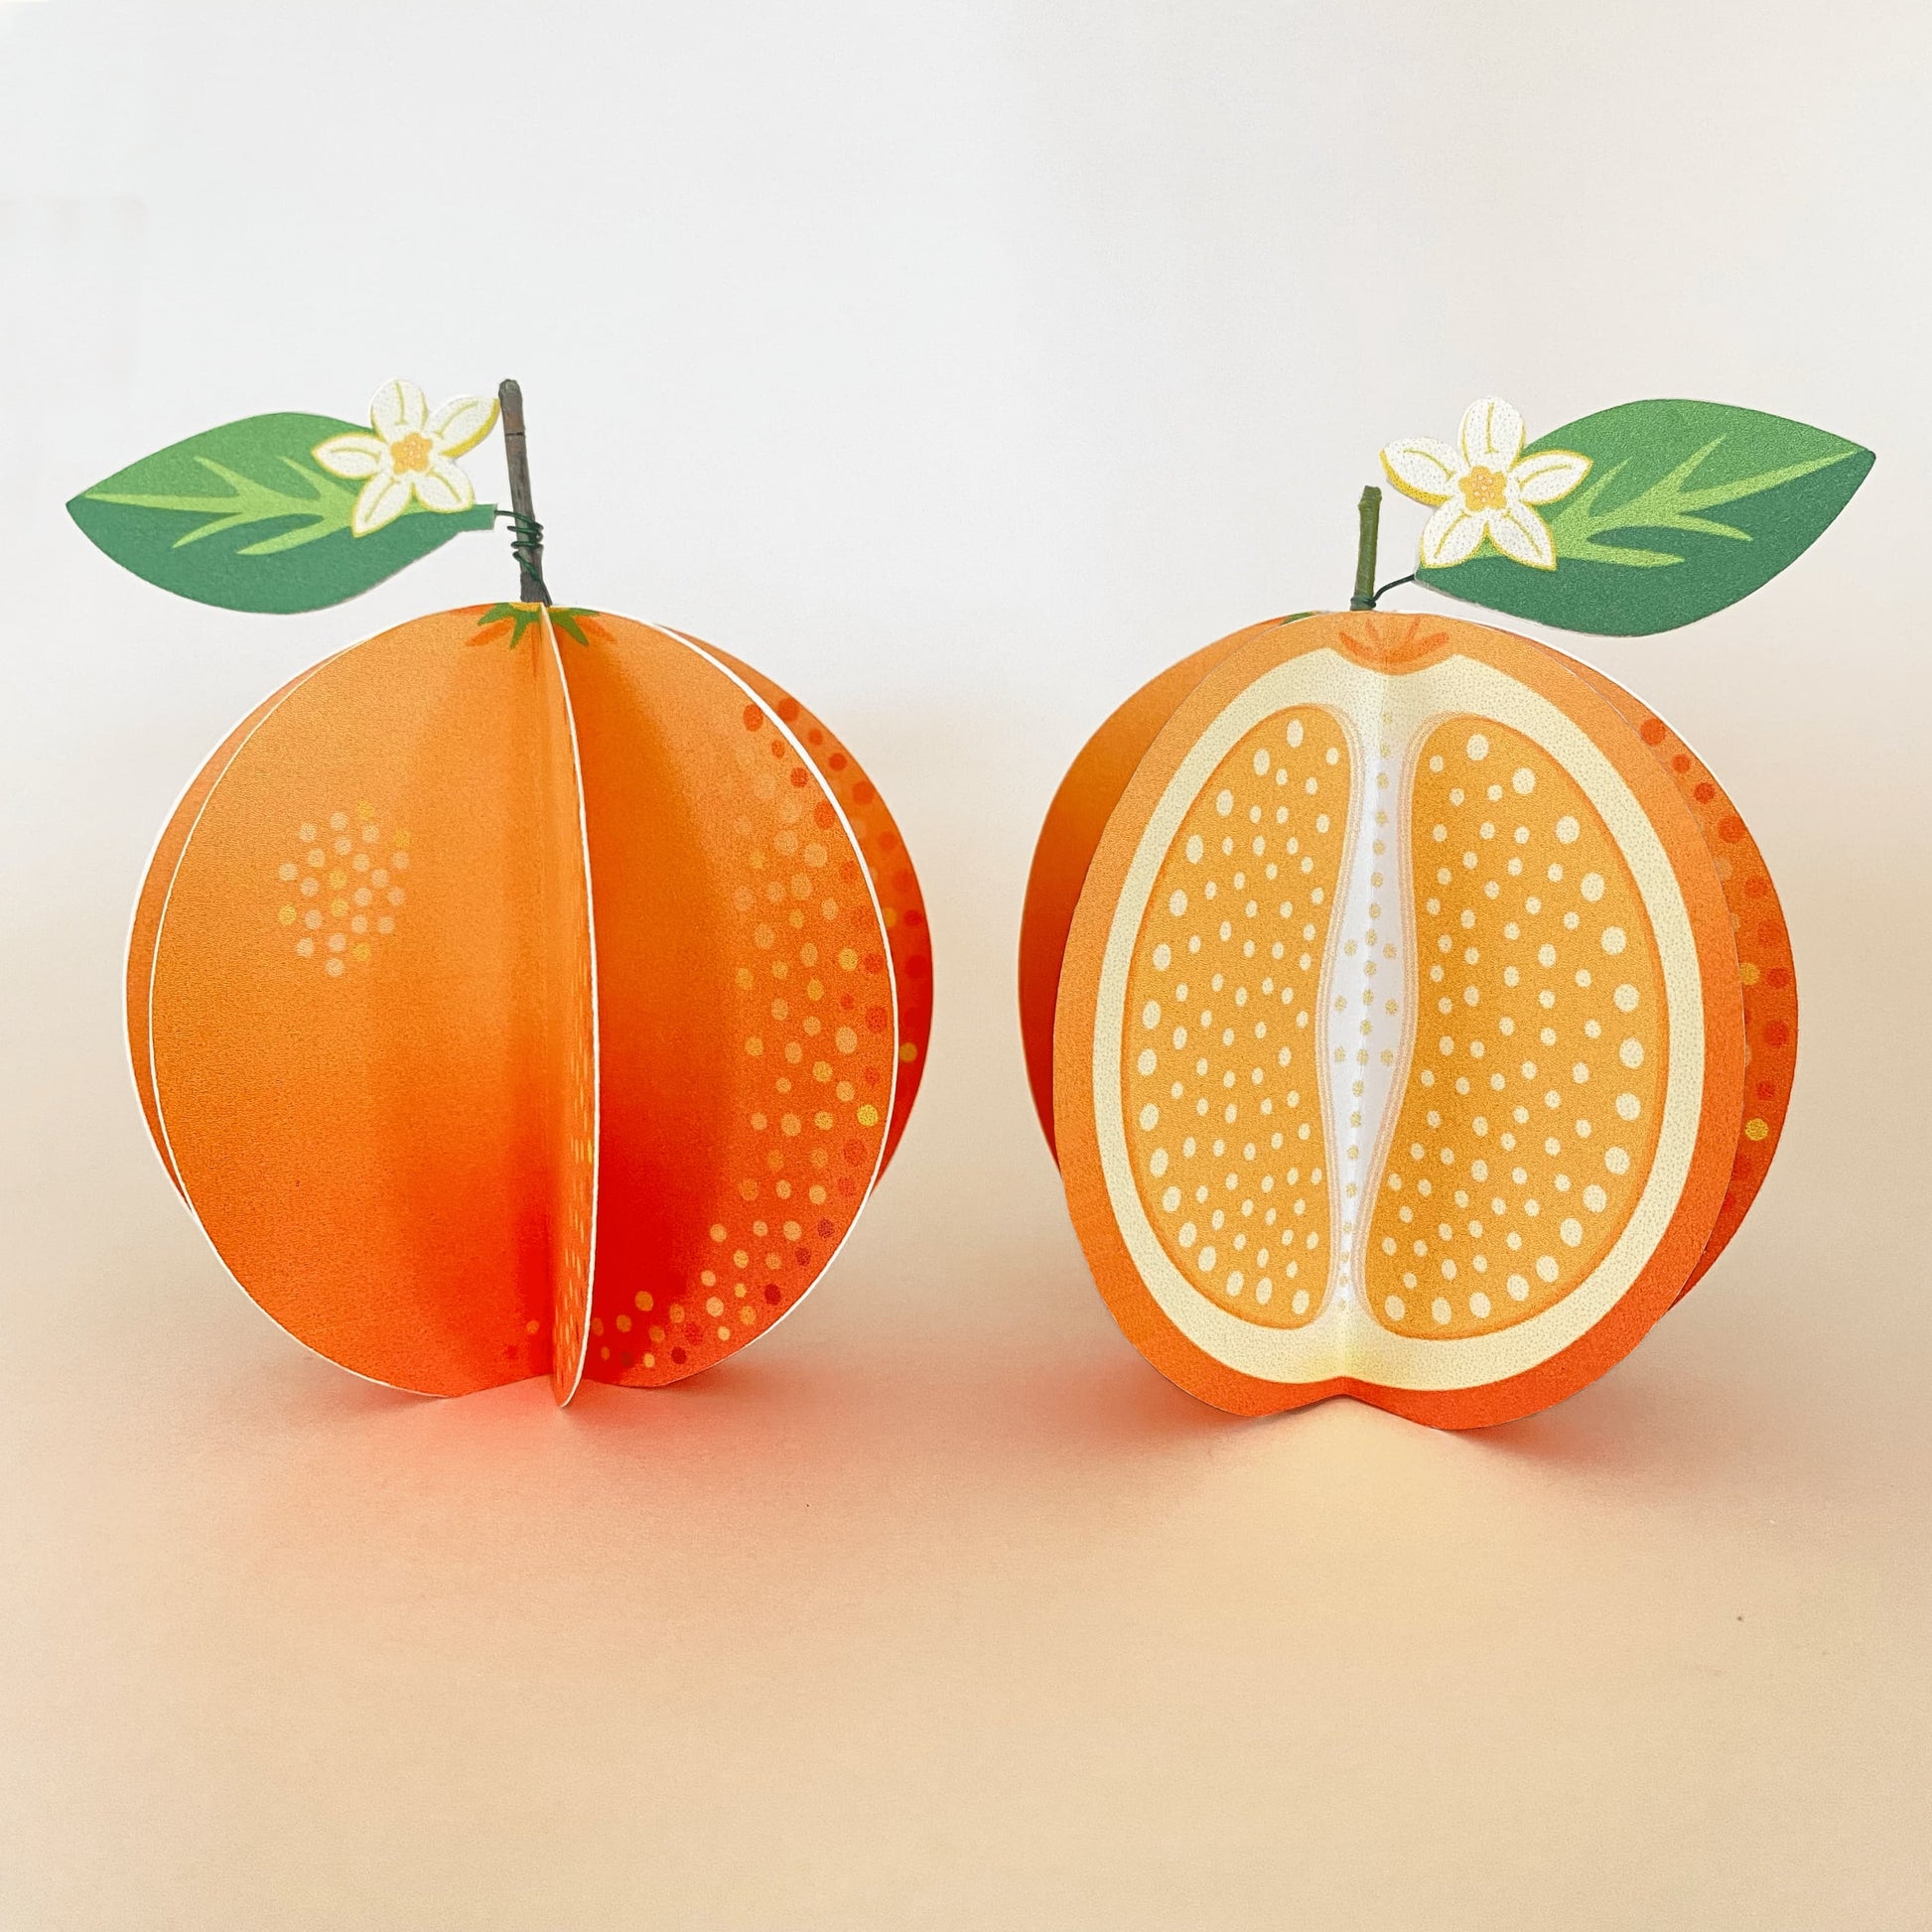 a set of 2 handmade paper oranges, one whole and one cut